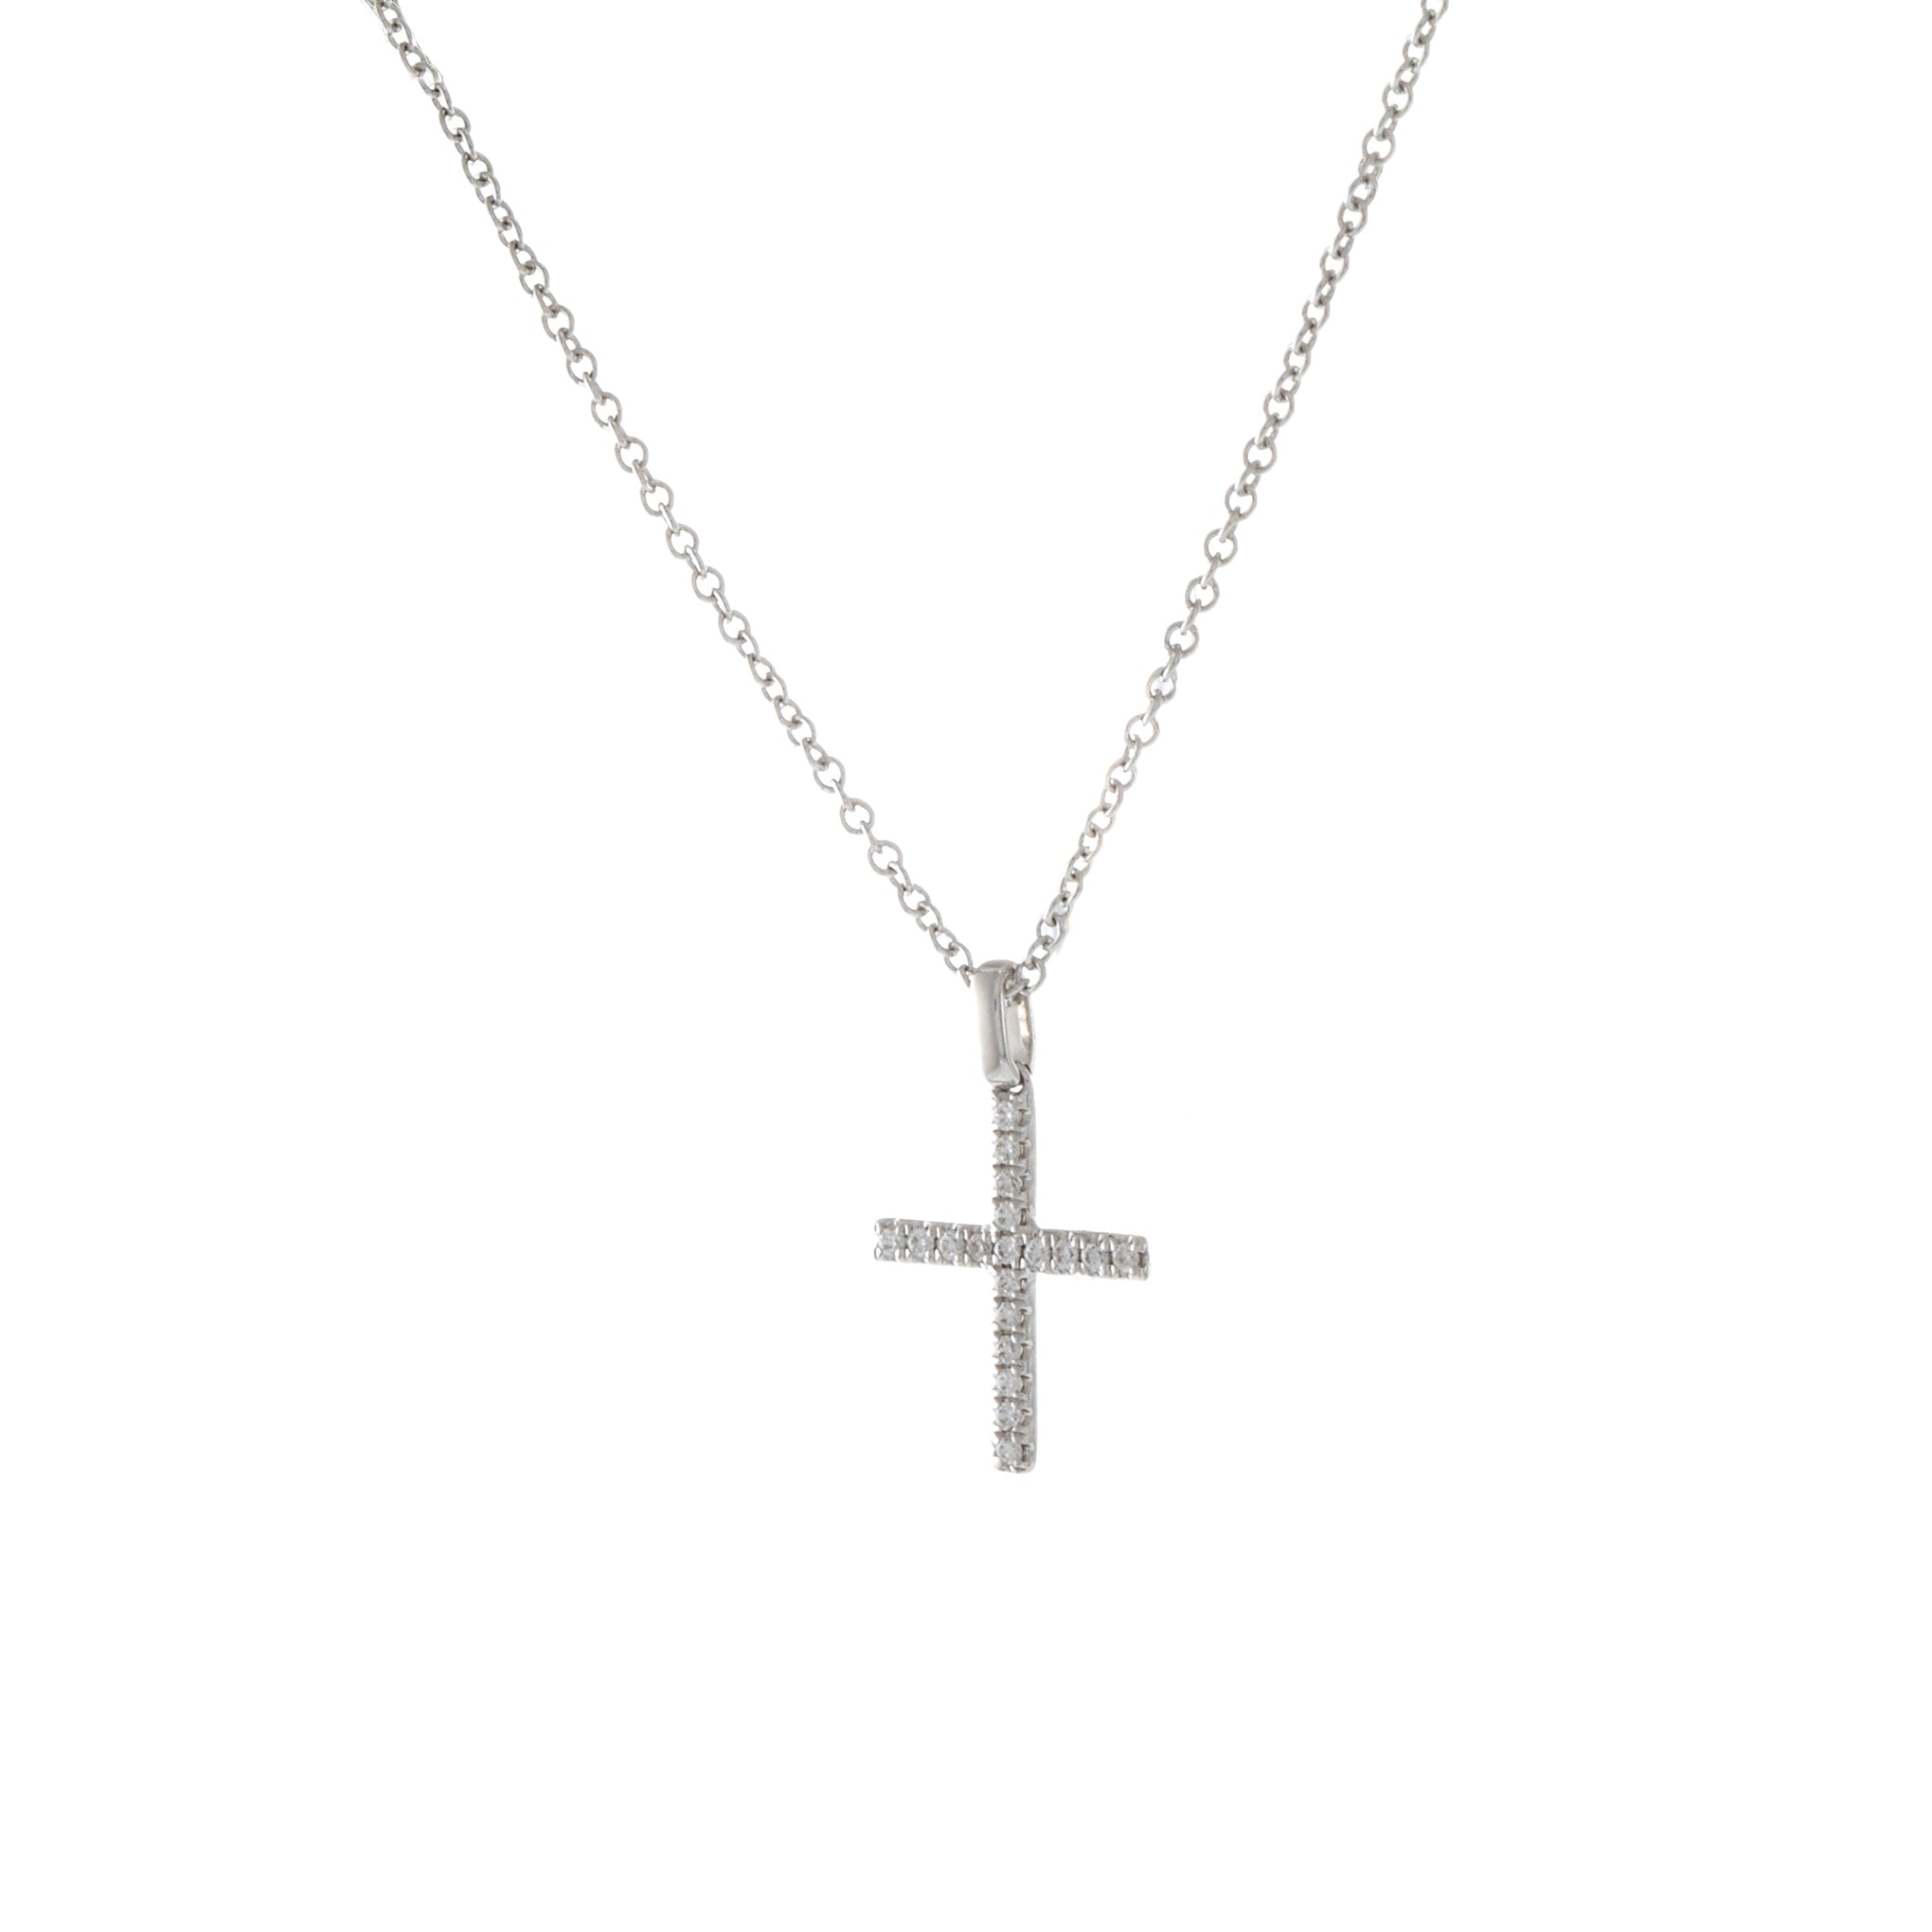 18KT White Gold Diamond Cross Pendant With 14KT Chain